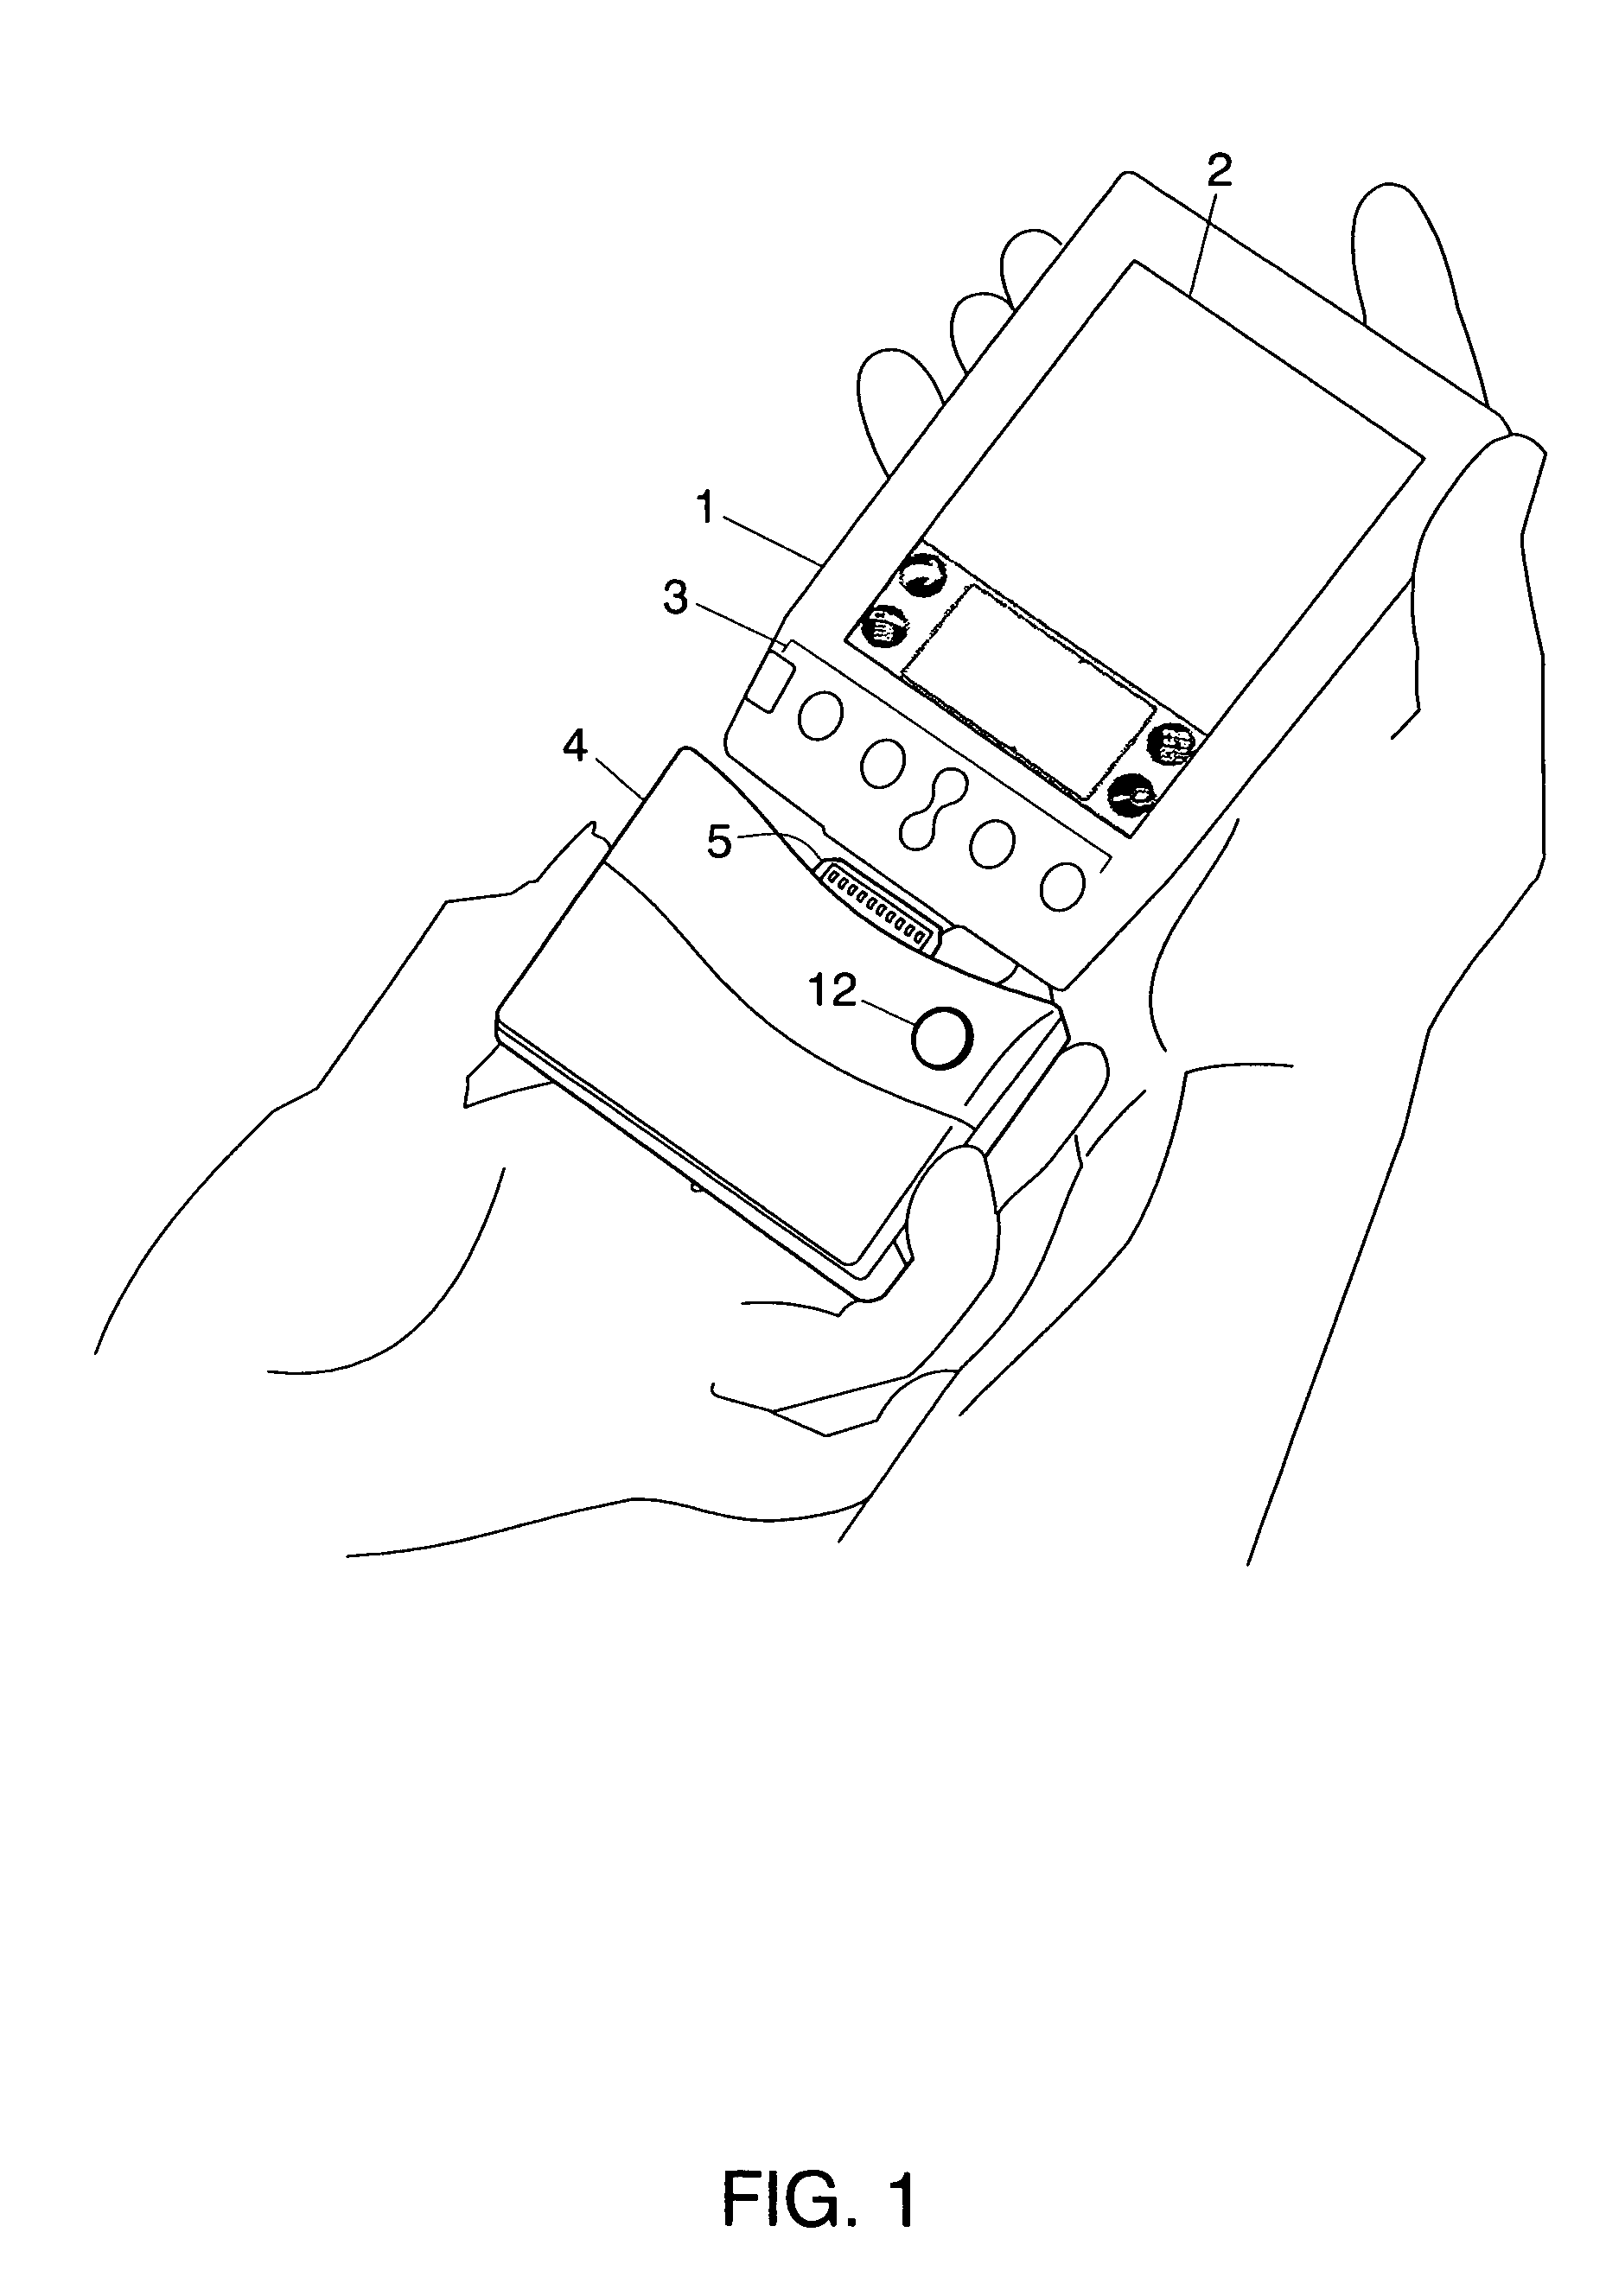 Hand-held computer device and method for interactive data acquisition, analysis, annotation, and calibration